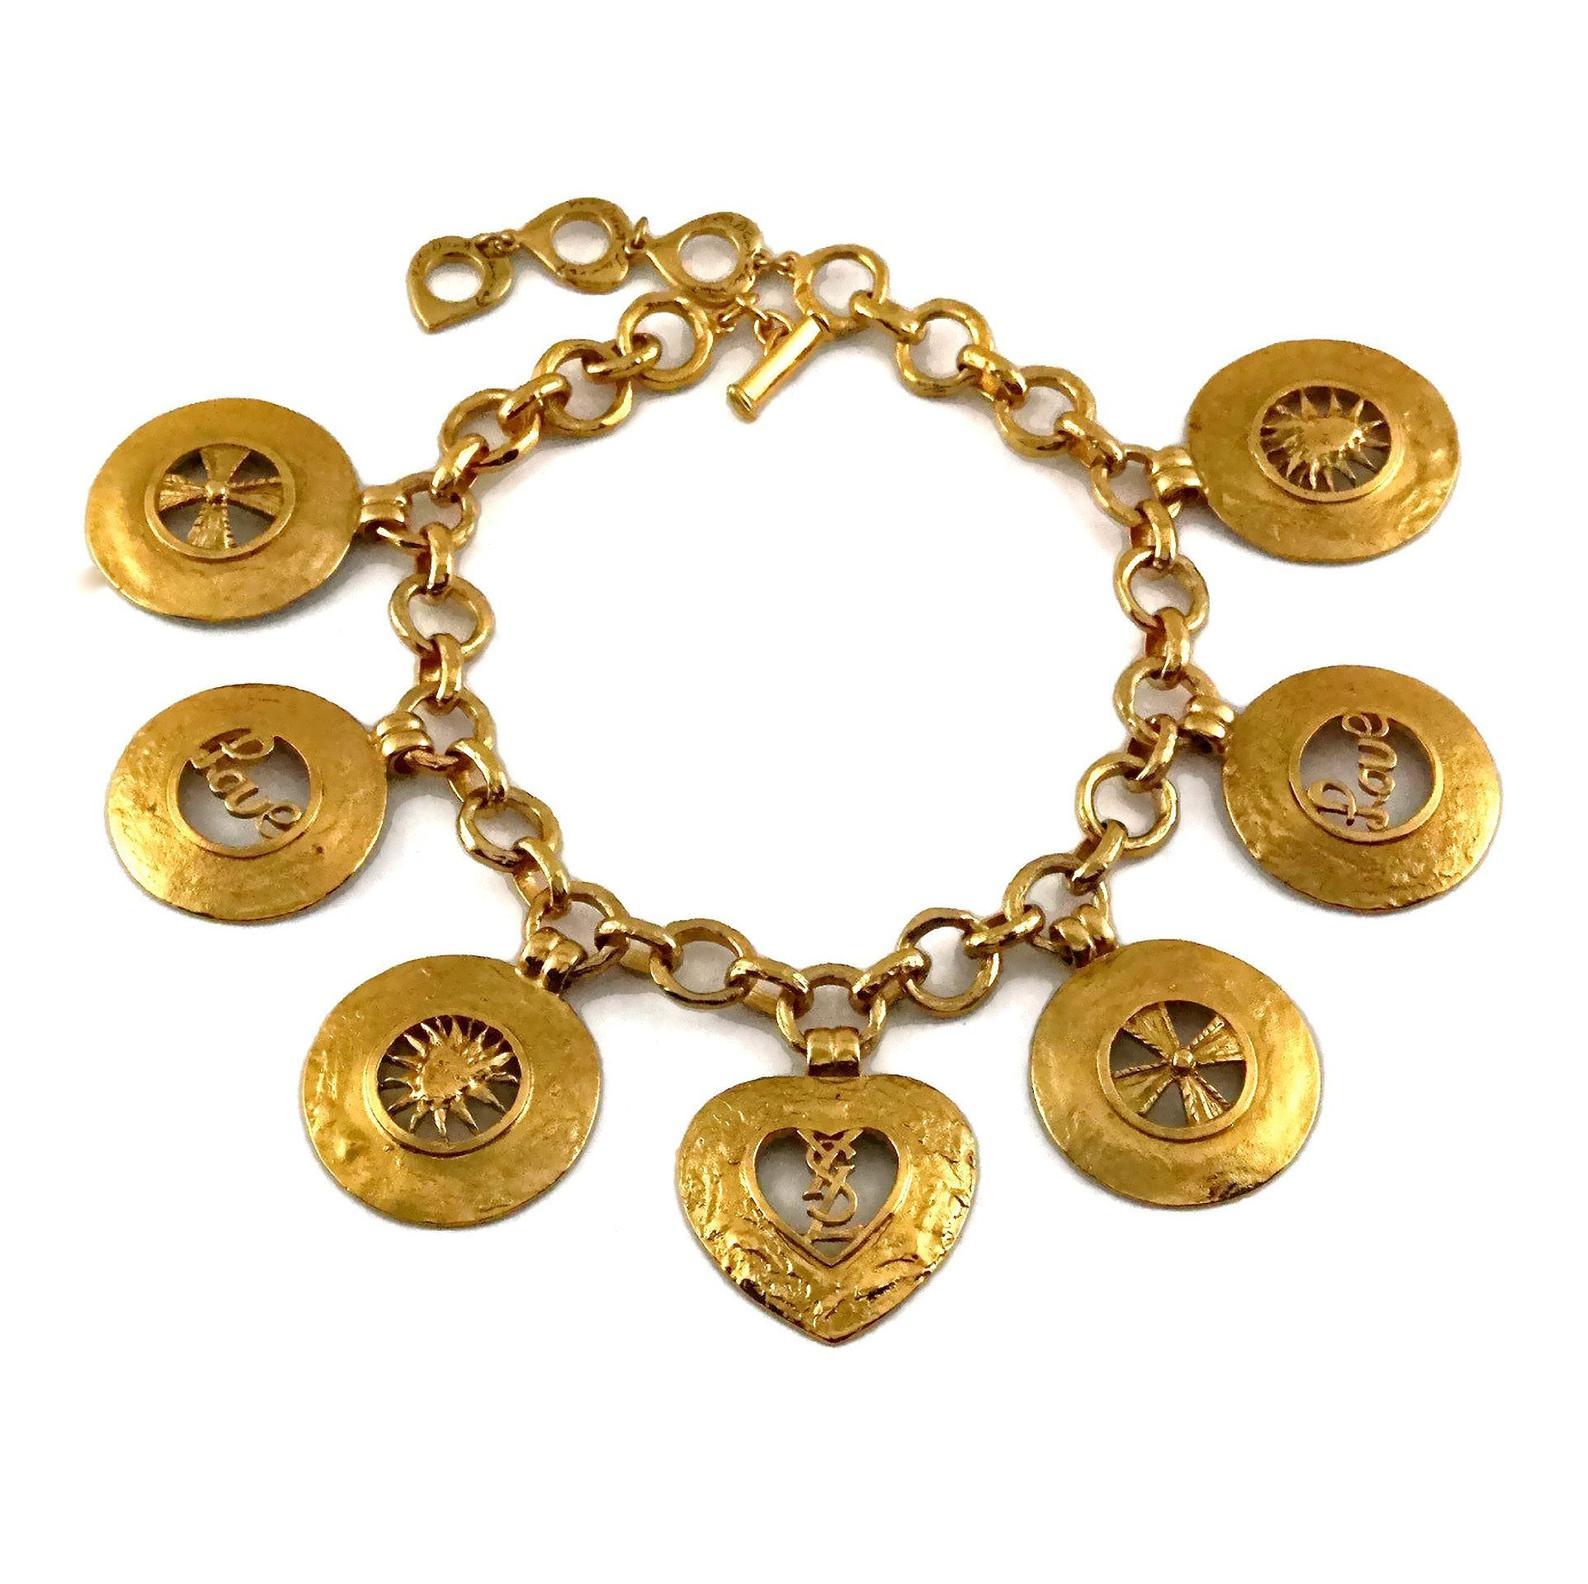 Vintage YVES SAINT LAURENT Ysl Iconic Emblem Disc Medallion Charm Necklace

Measurements:
Height: 2.20 inches (5.6 cm)
Wearable Length: 16.33 inches (41.5 cm) until 18.30 inches (46.5 cm)

Features:
- 100% Authentic YVES SAINT LAURENT.
- 7 Chunky